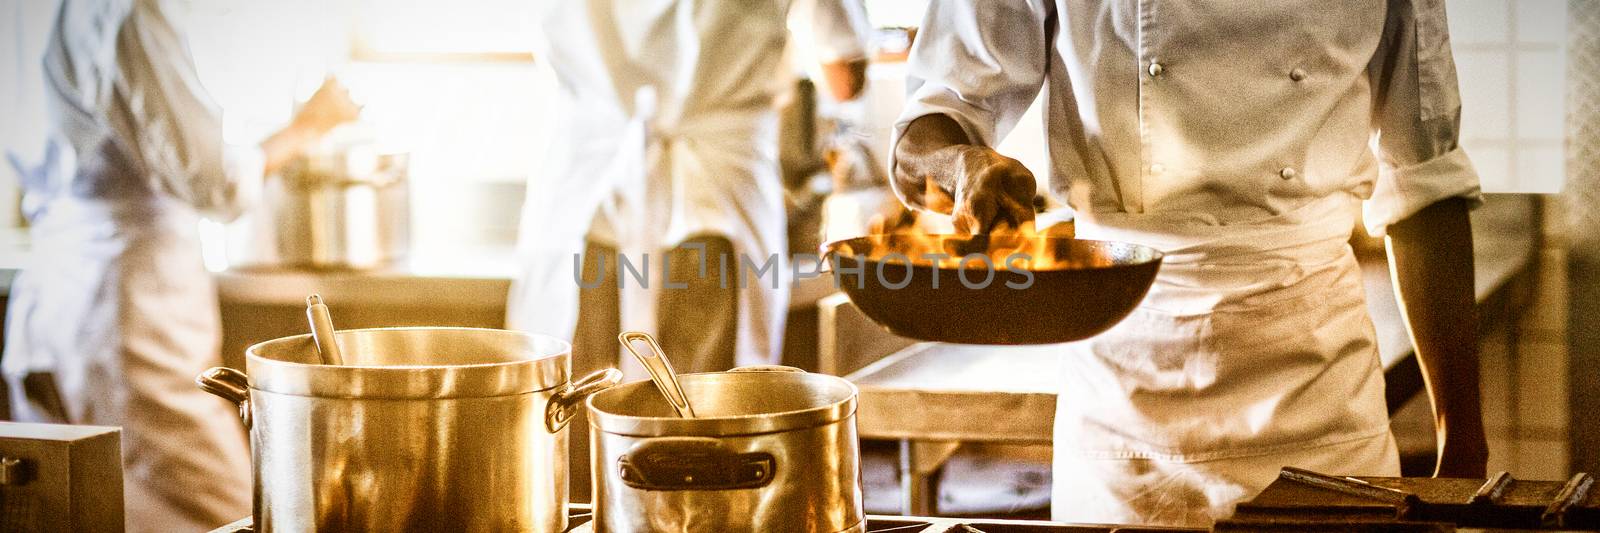 Chef cooking in commercial kitchen by Wavebreakmedia